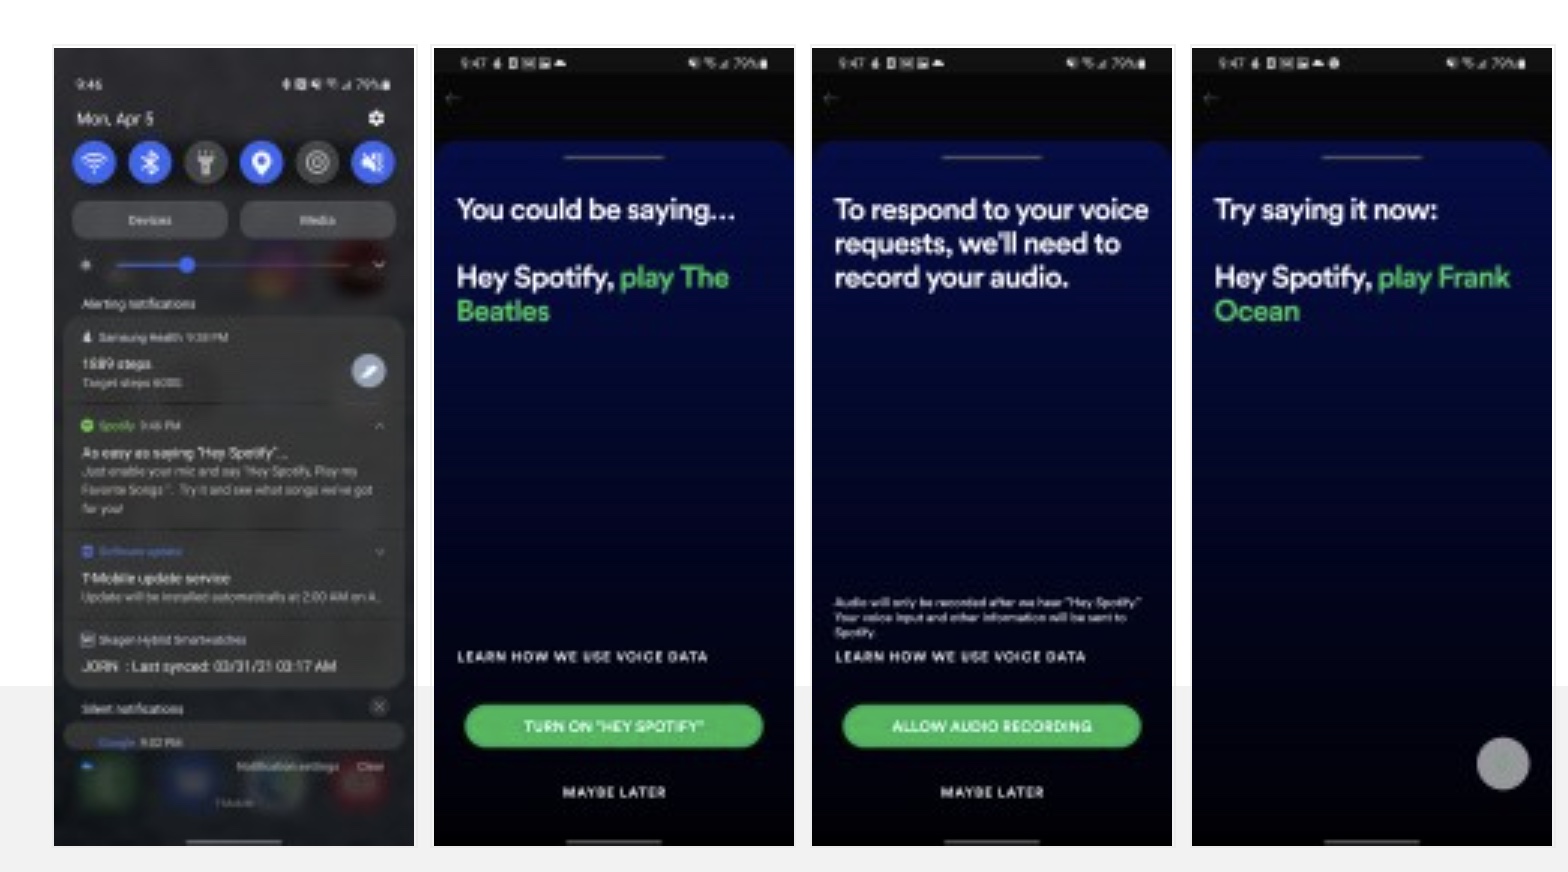 Spotify rolls out hands-free 'Hey Spotify' voice controls on